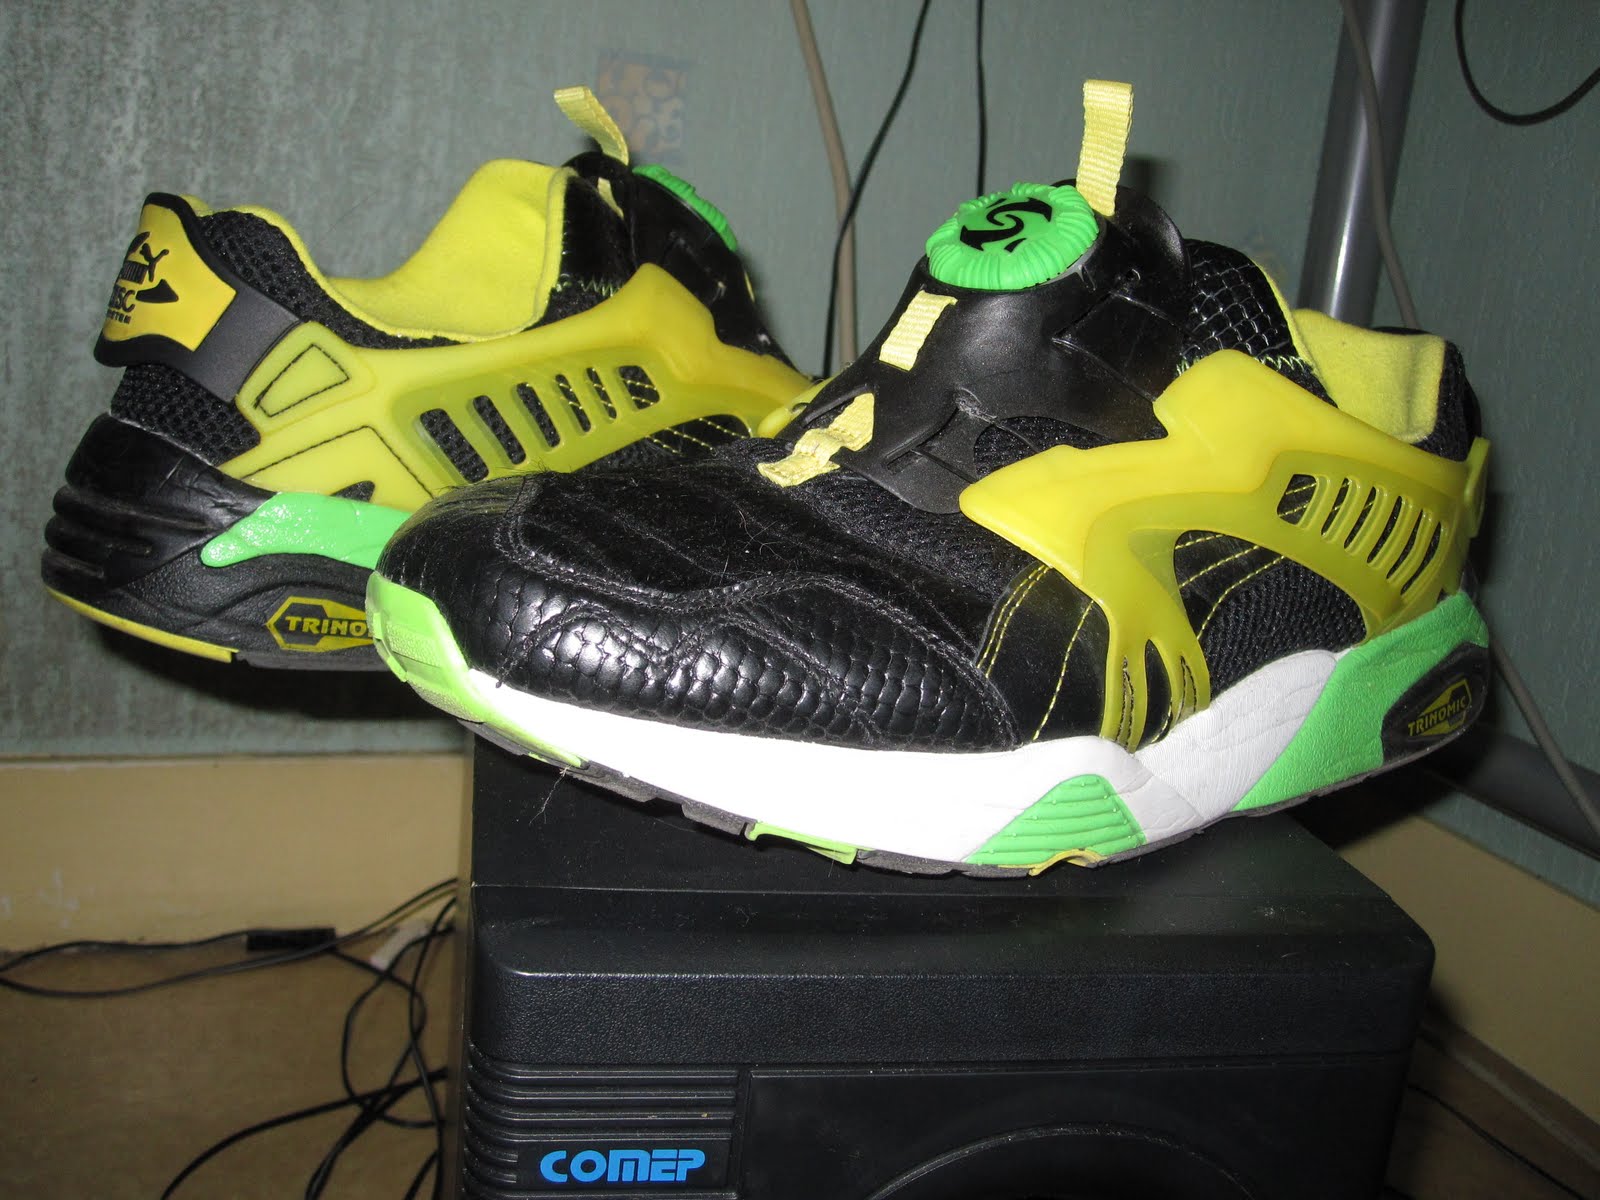 My Sneaker's Collection: Puma Disc Blazer Monster